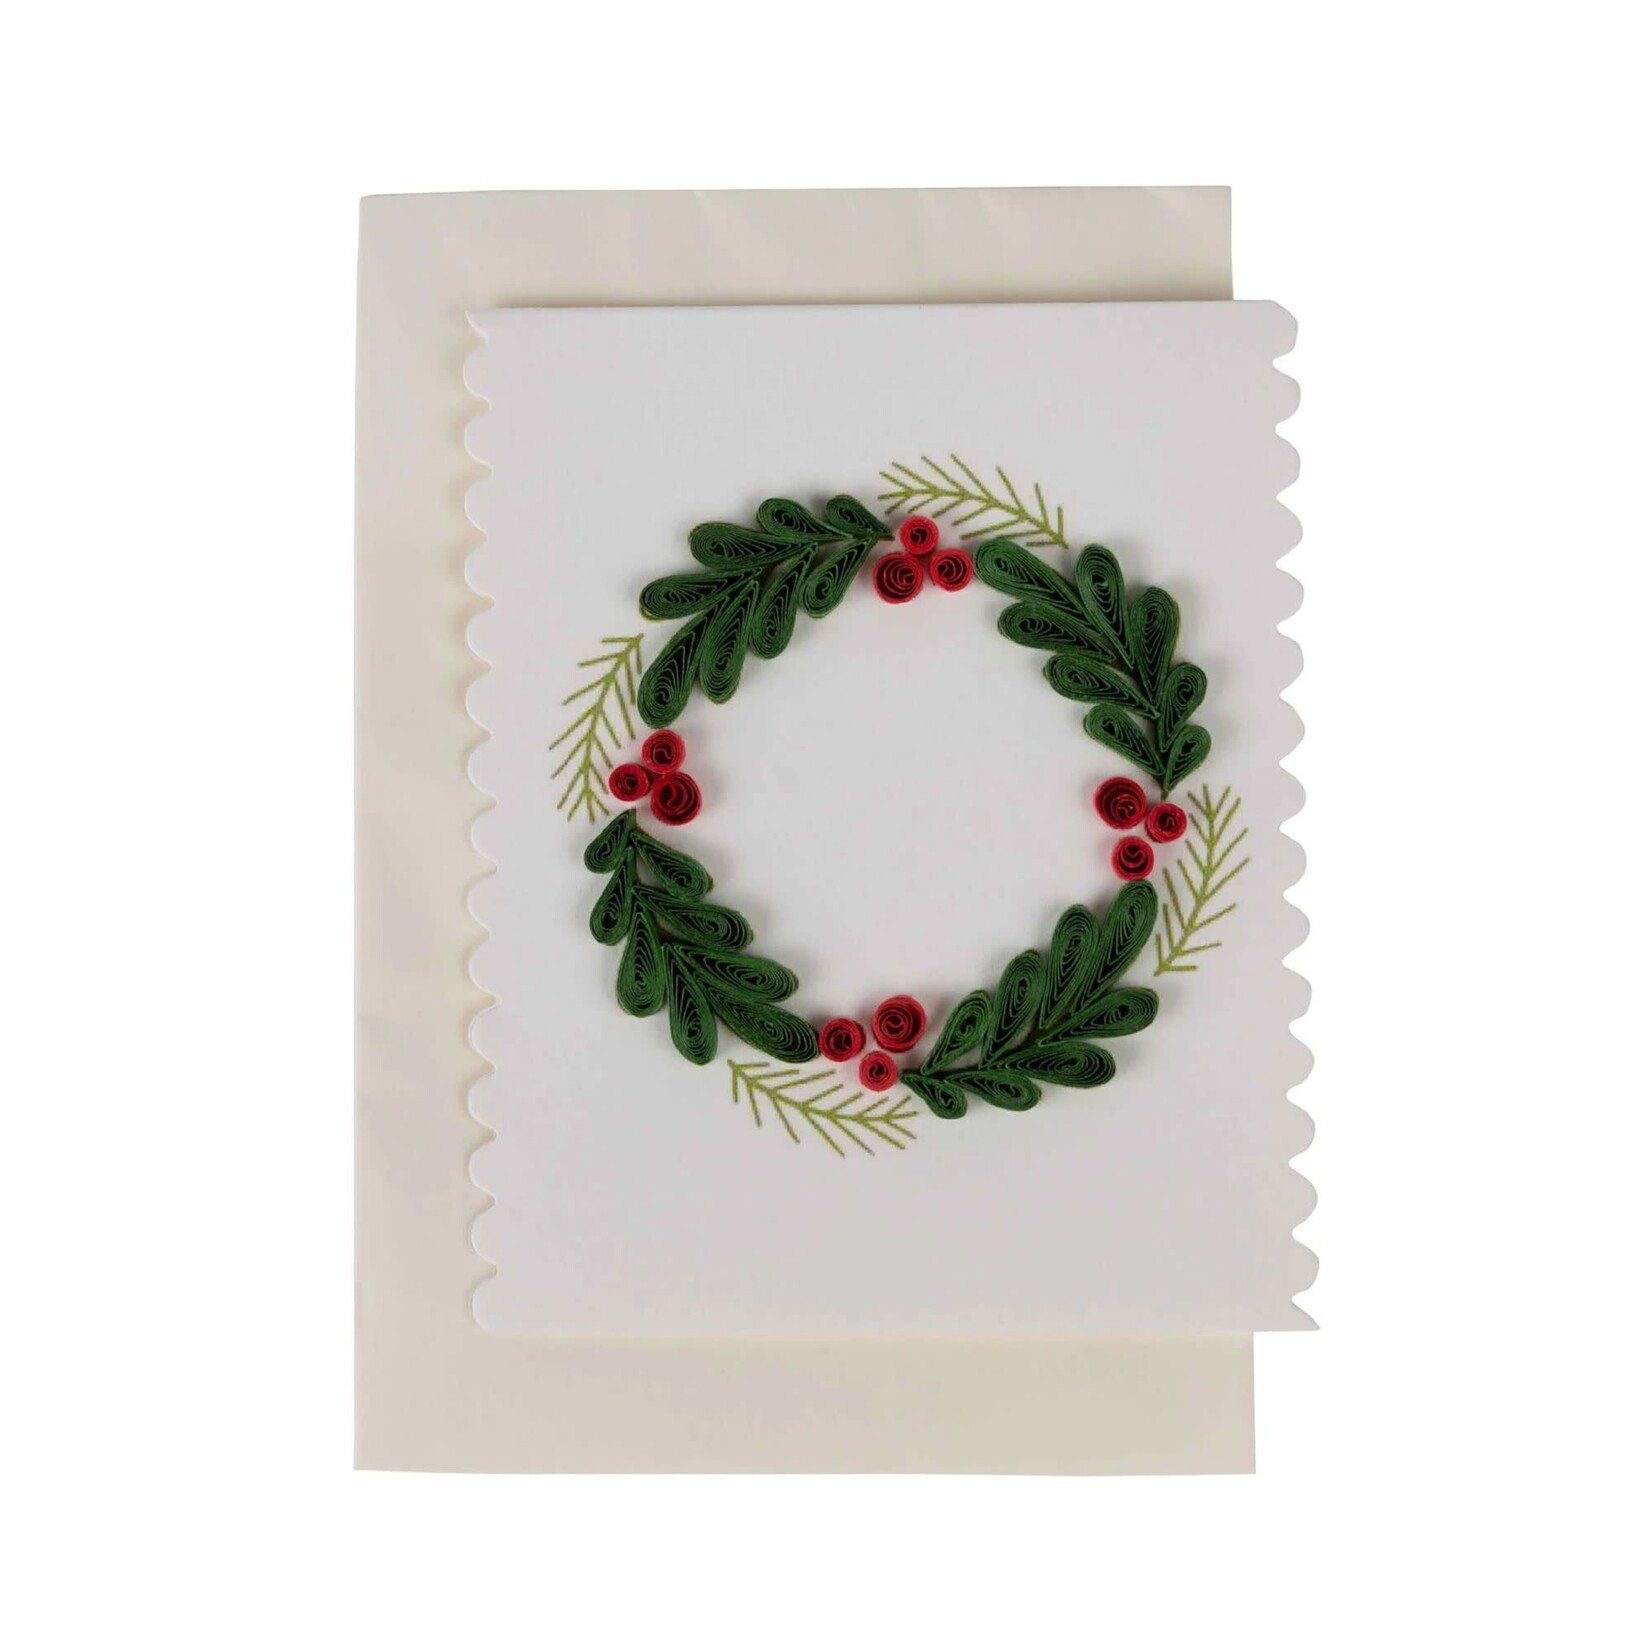 Vietnam Card quilled holiday wreath M/3 ppr 3.5x4.5 grn/rd